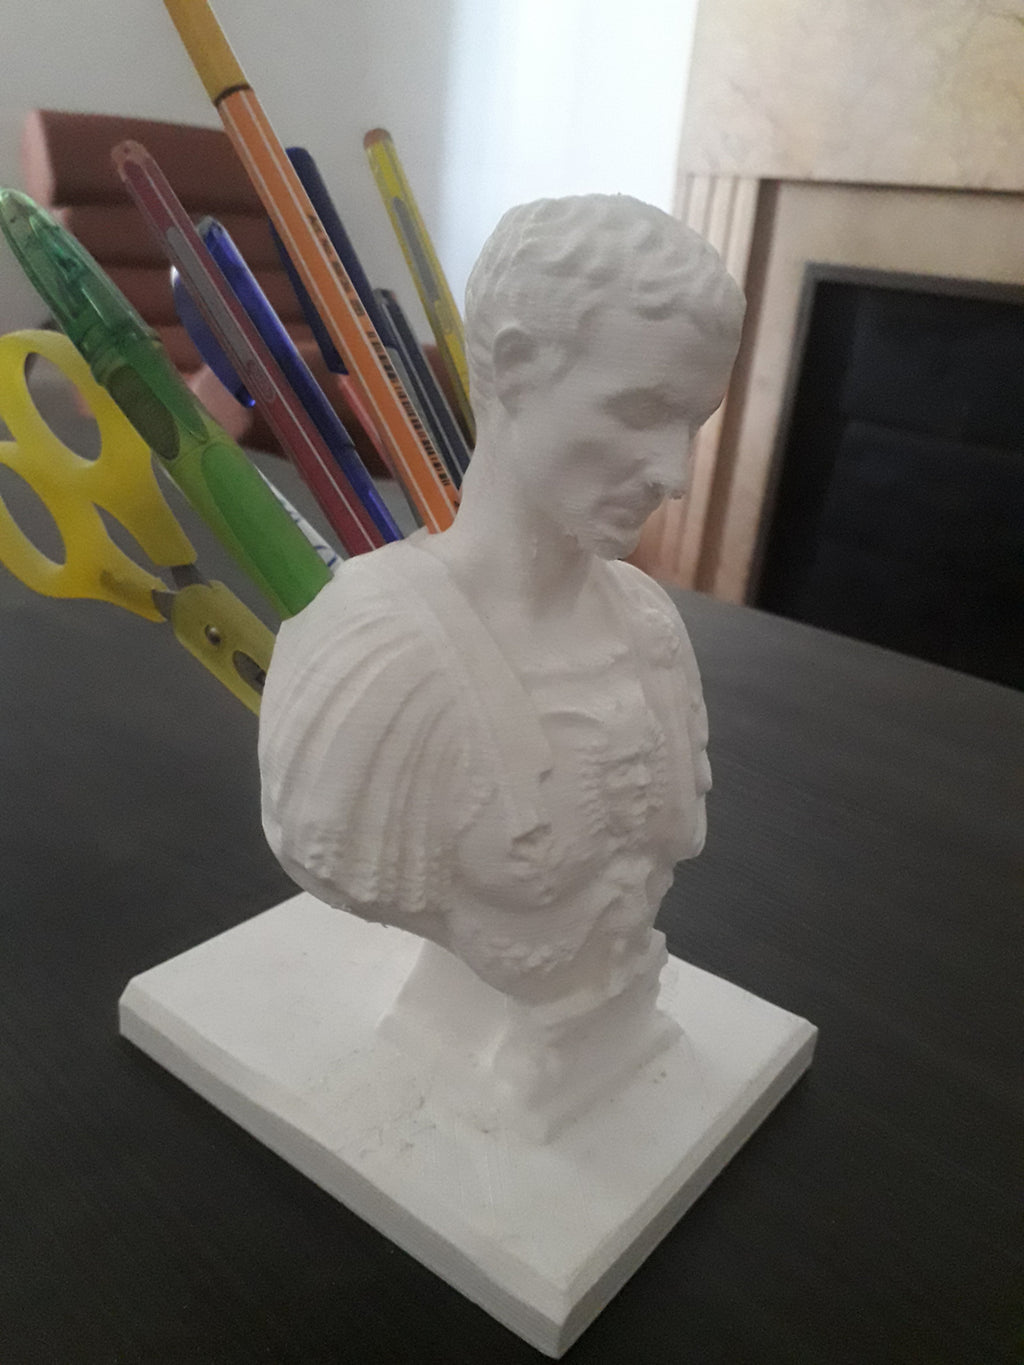 An image of a statue of Caesar with holes in his back to hold pencils, looking like he was stabbed